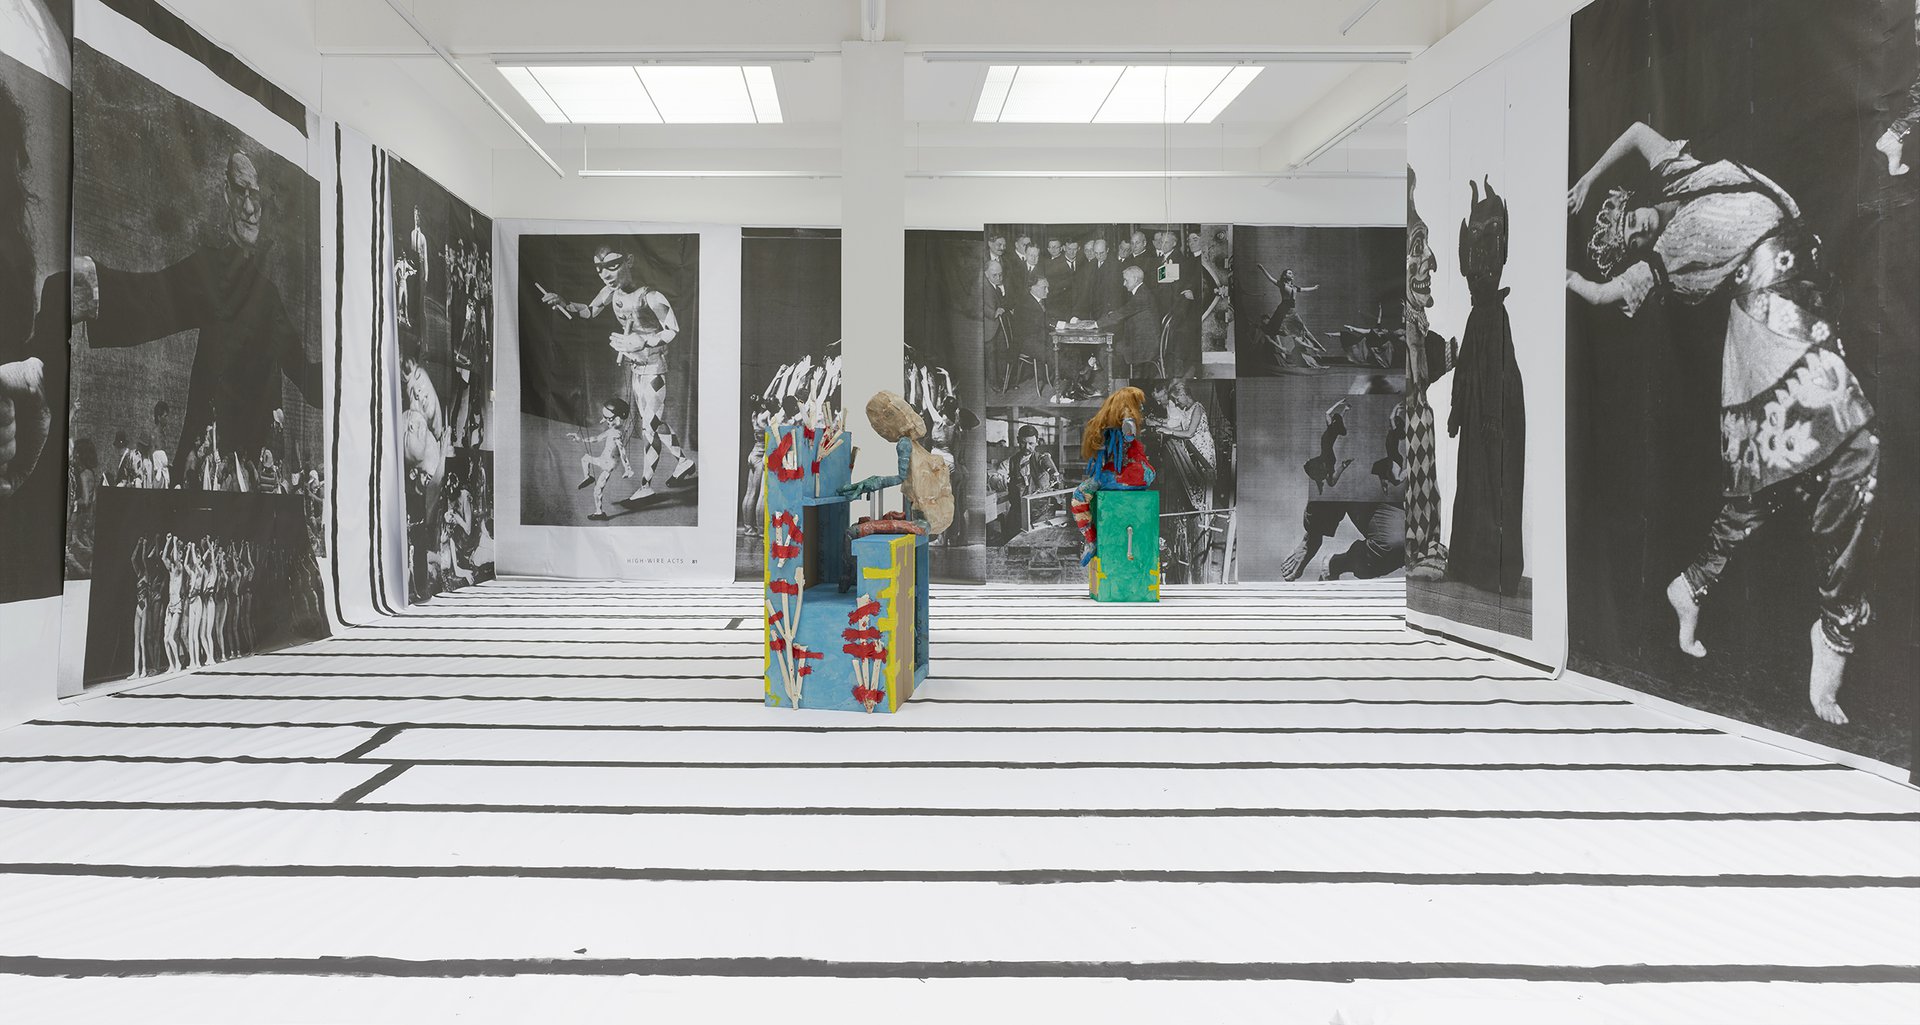 Marvin Gaye Chetwynd, ‘Camshafts in the Rain’, 2016, commissioned by Bonner Kunstverein, courtesy the artist and Sadie Coles HQ, London. Photo: Simon Vogel